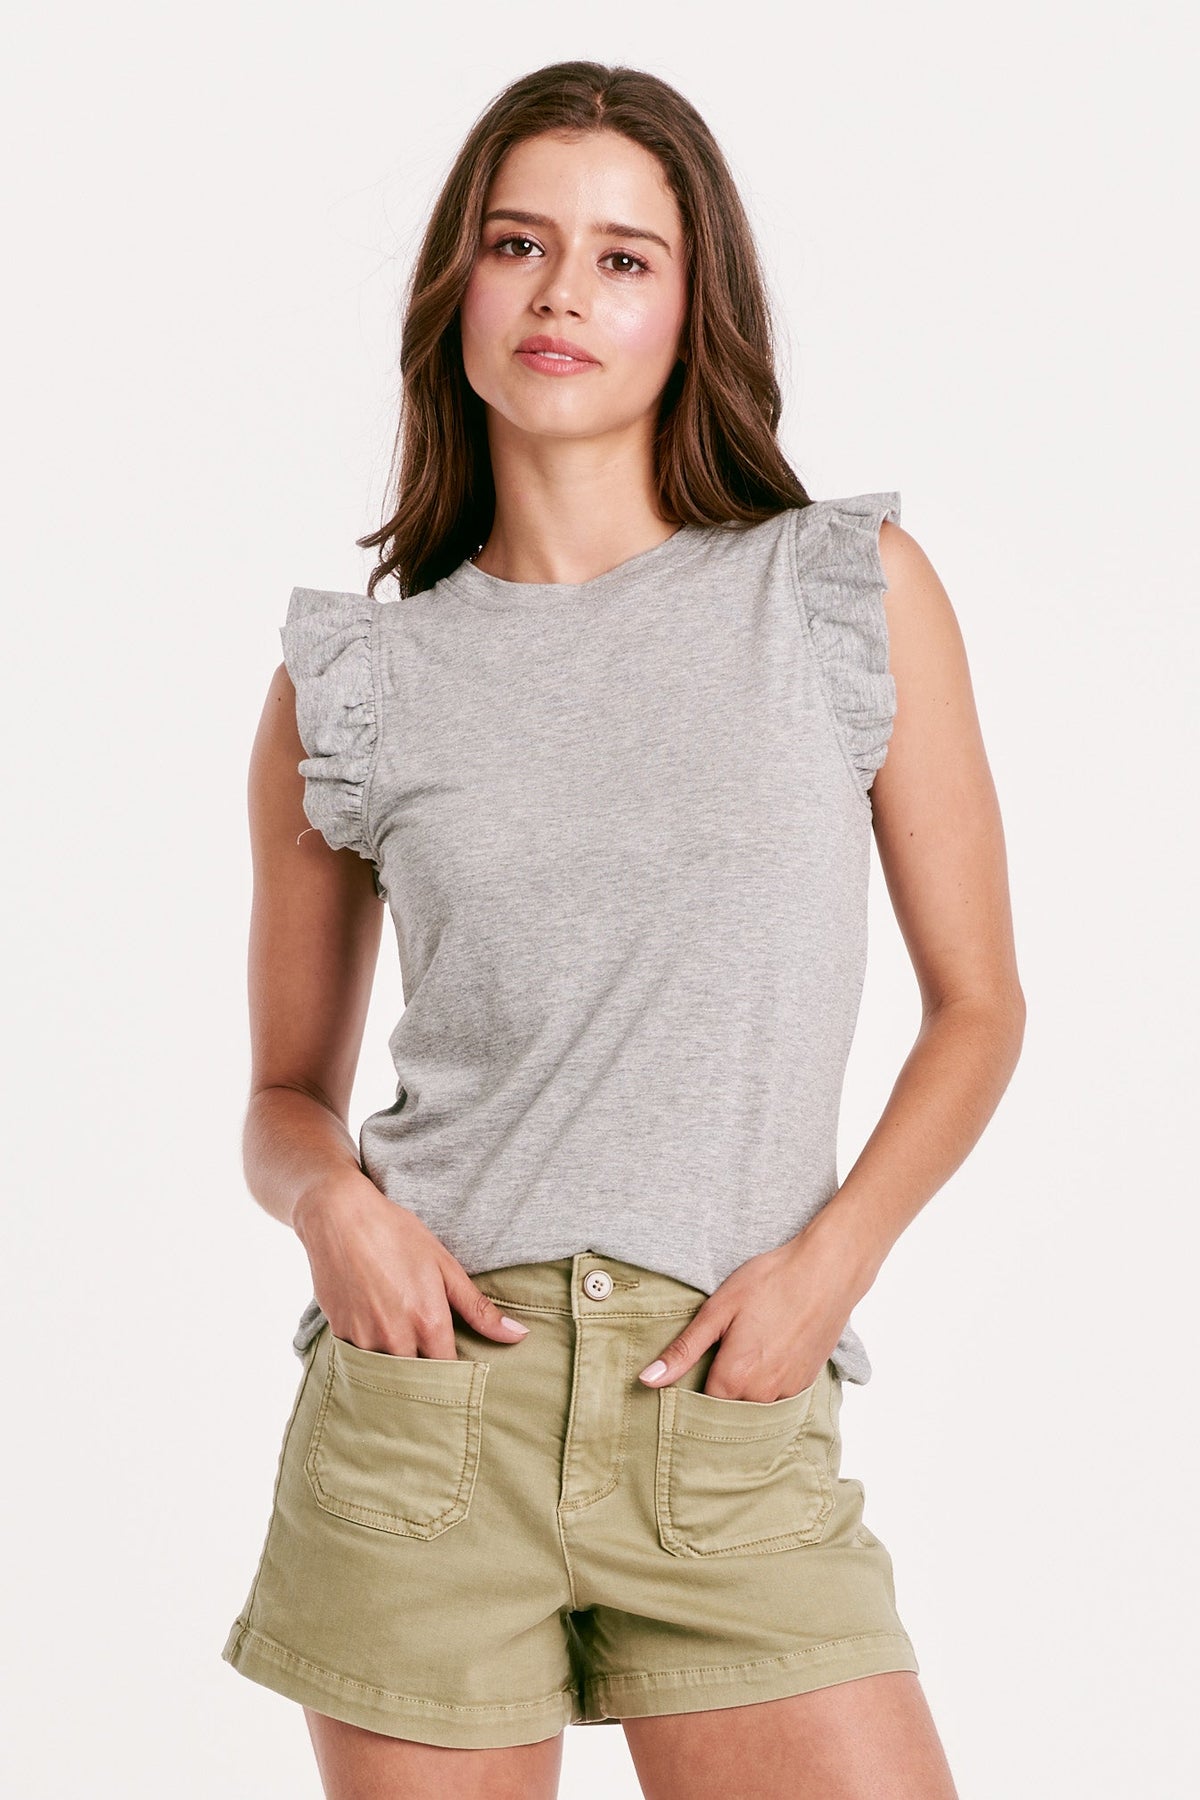 north-ruffle-trimmed-top-heather-gray